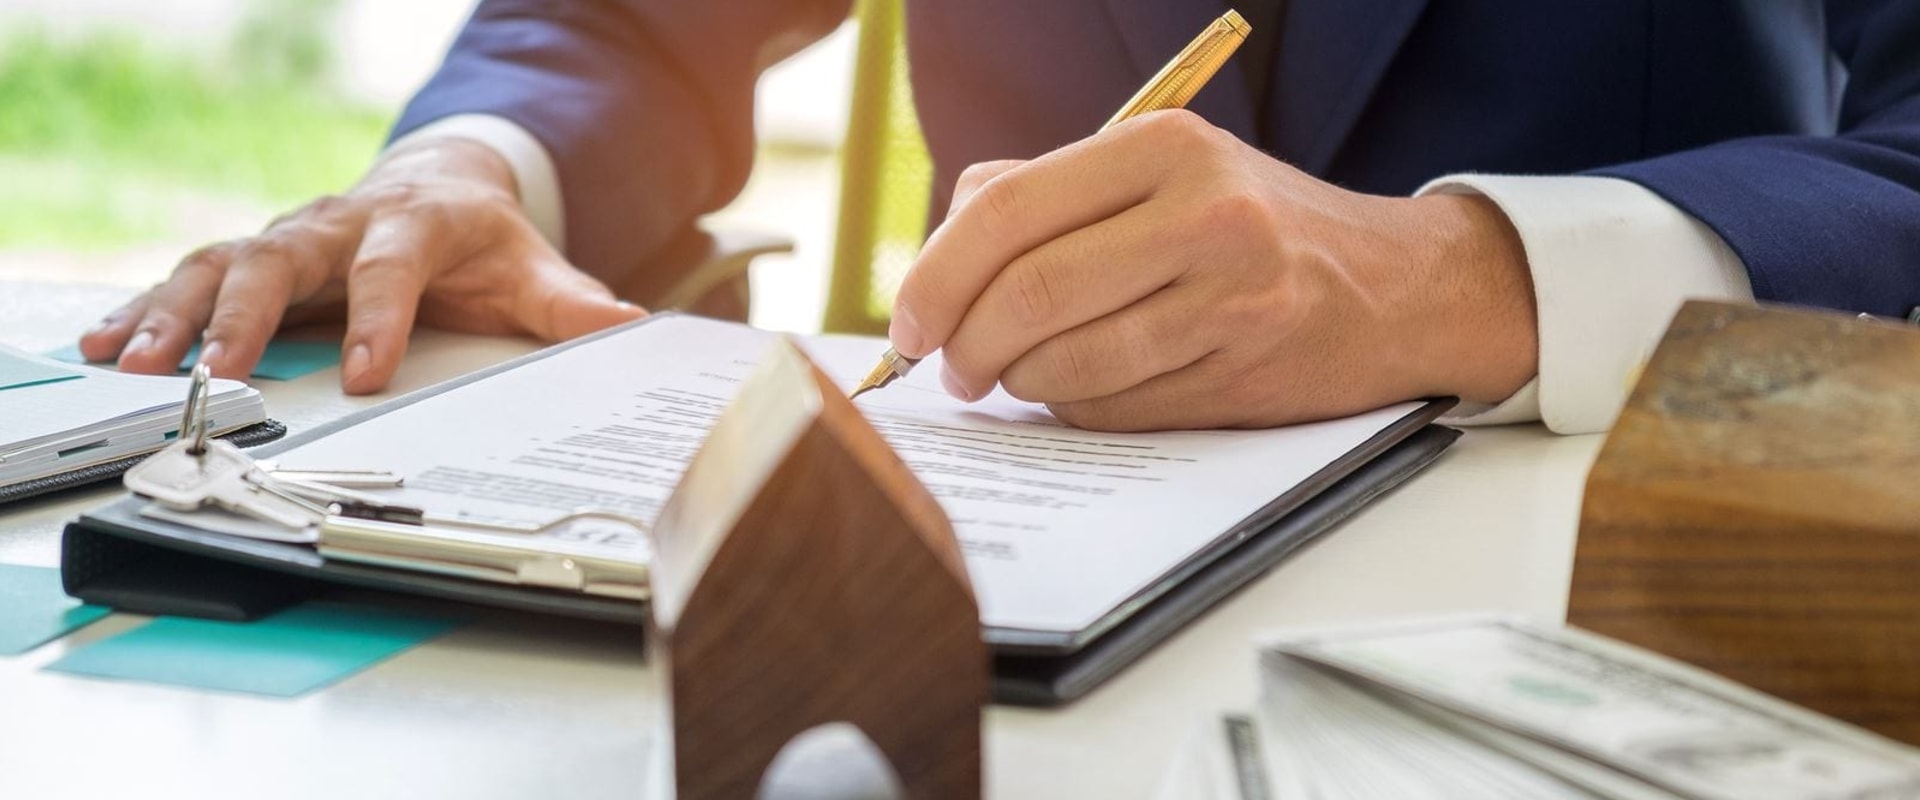 Is flipping real estate contracts legal?